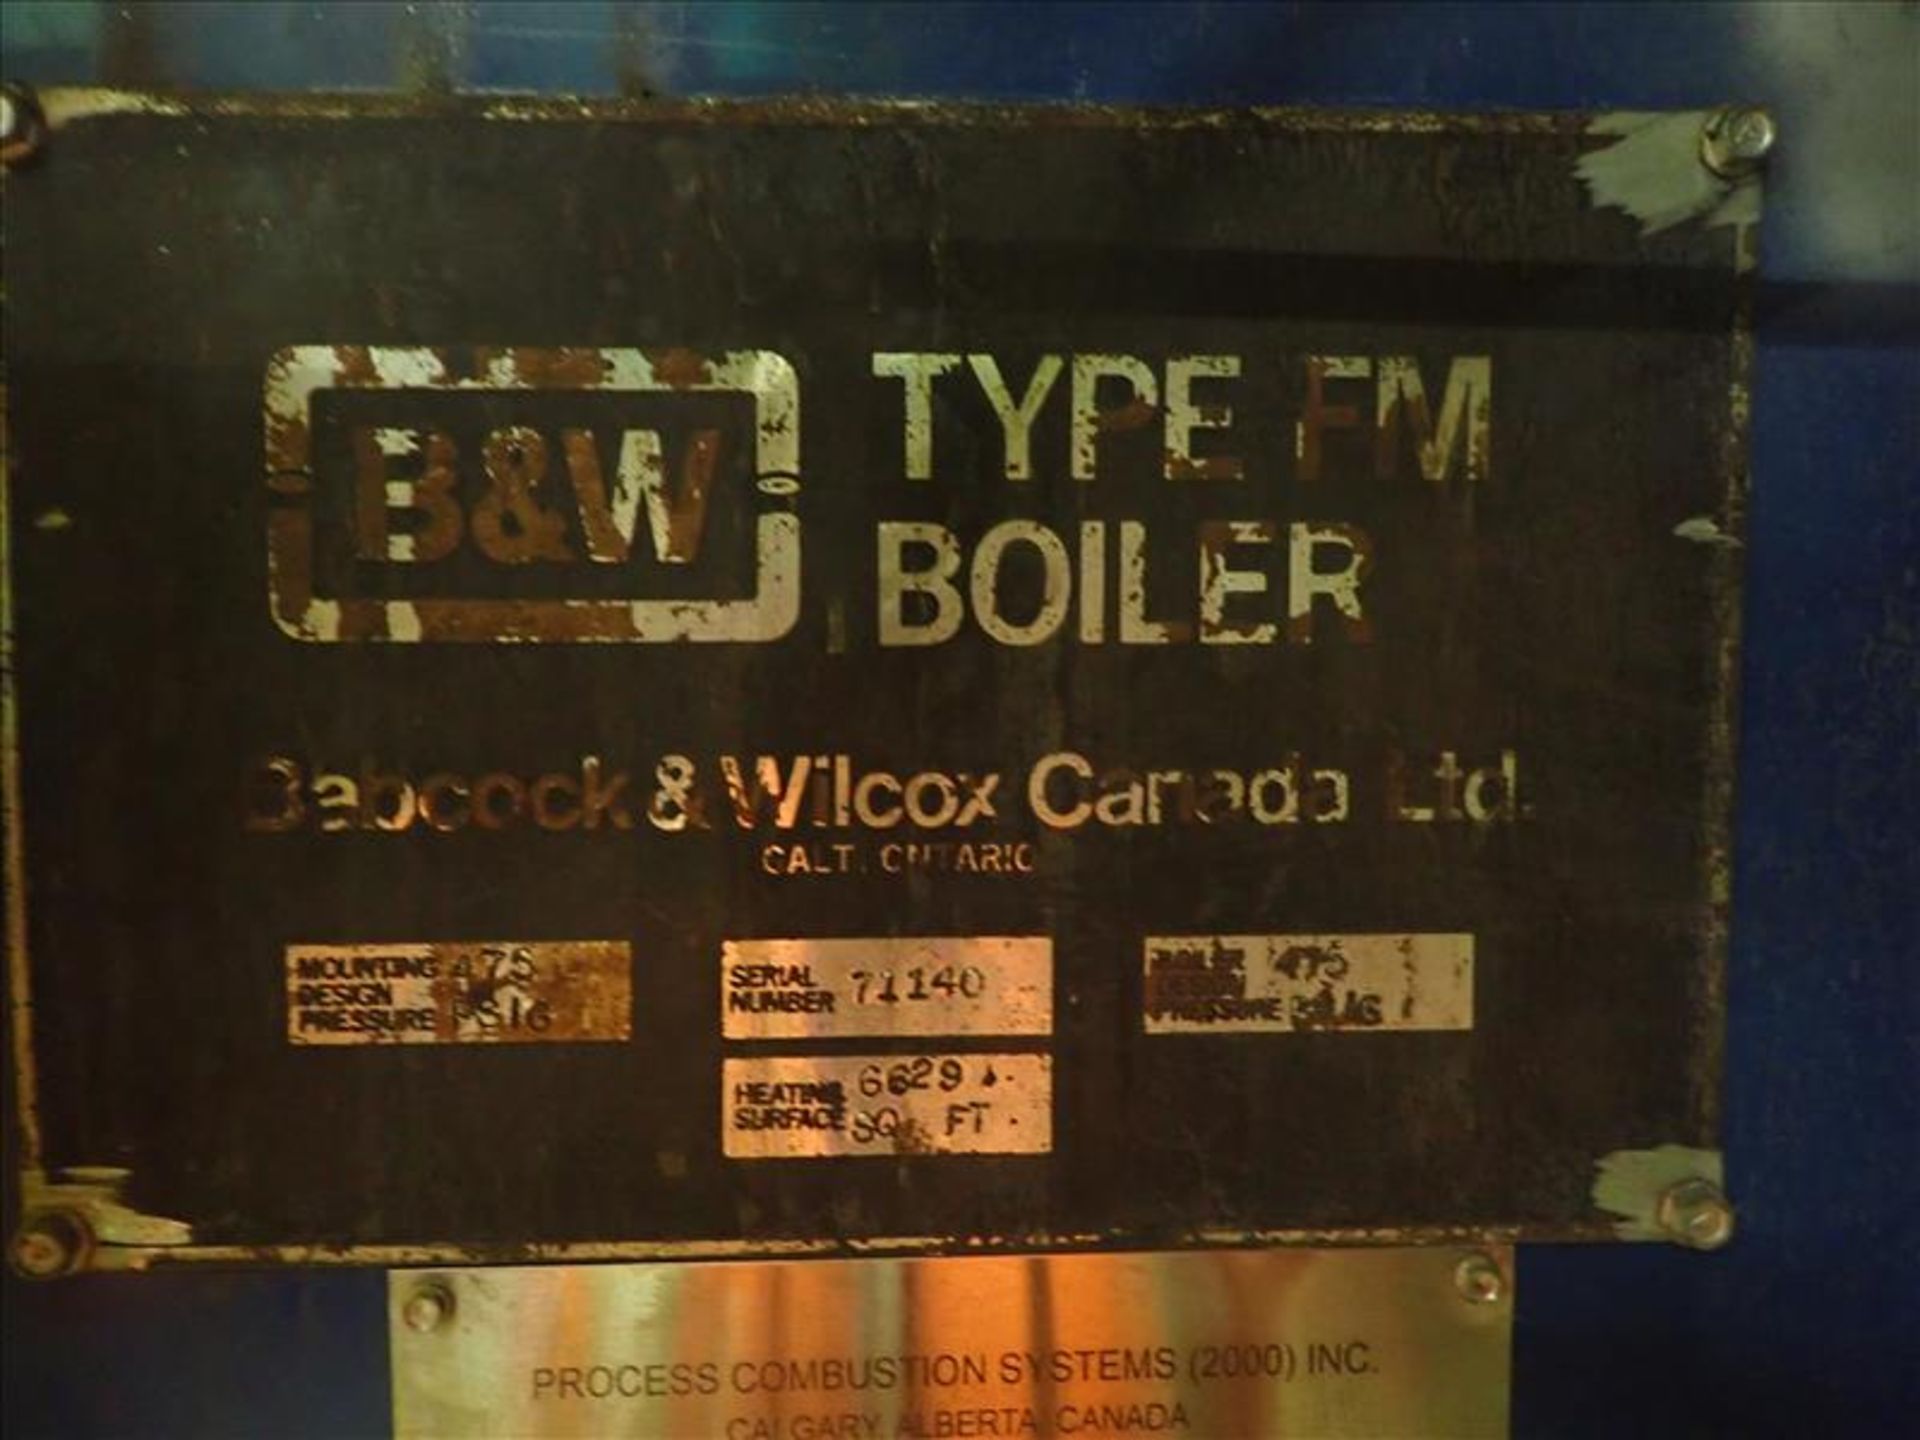 Bebcock and Wilcox forced draft water tube boiler, type FM, ser. no. 71140, 150MMBTU/hr, propane, - Image 5 of 6